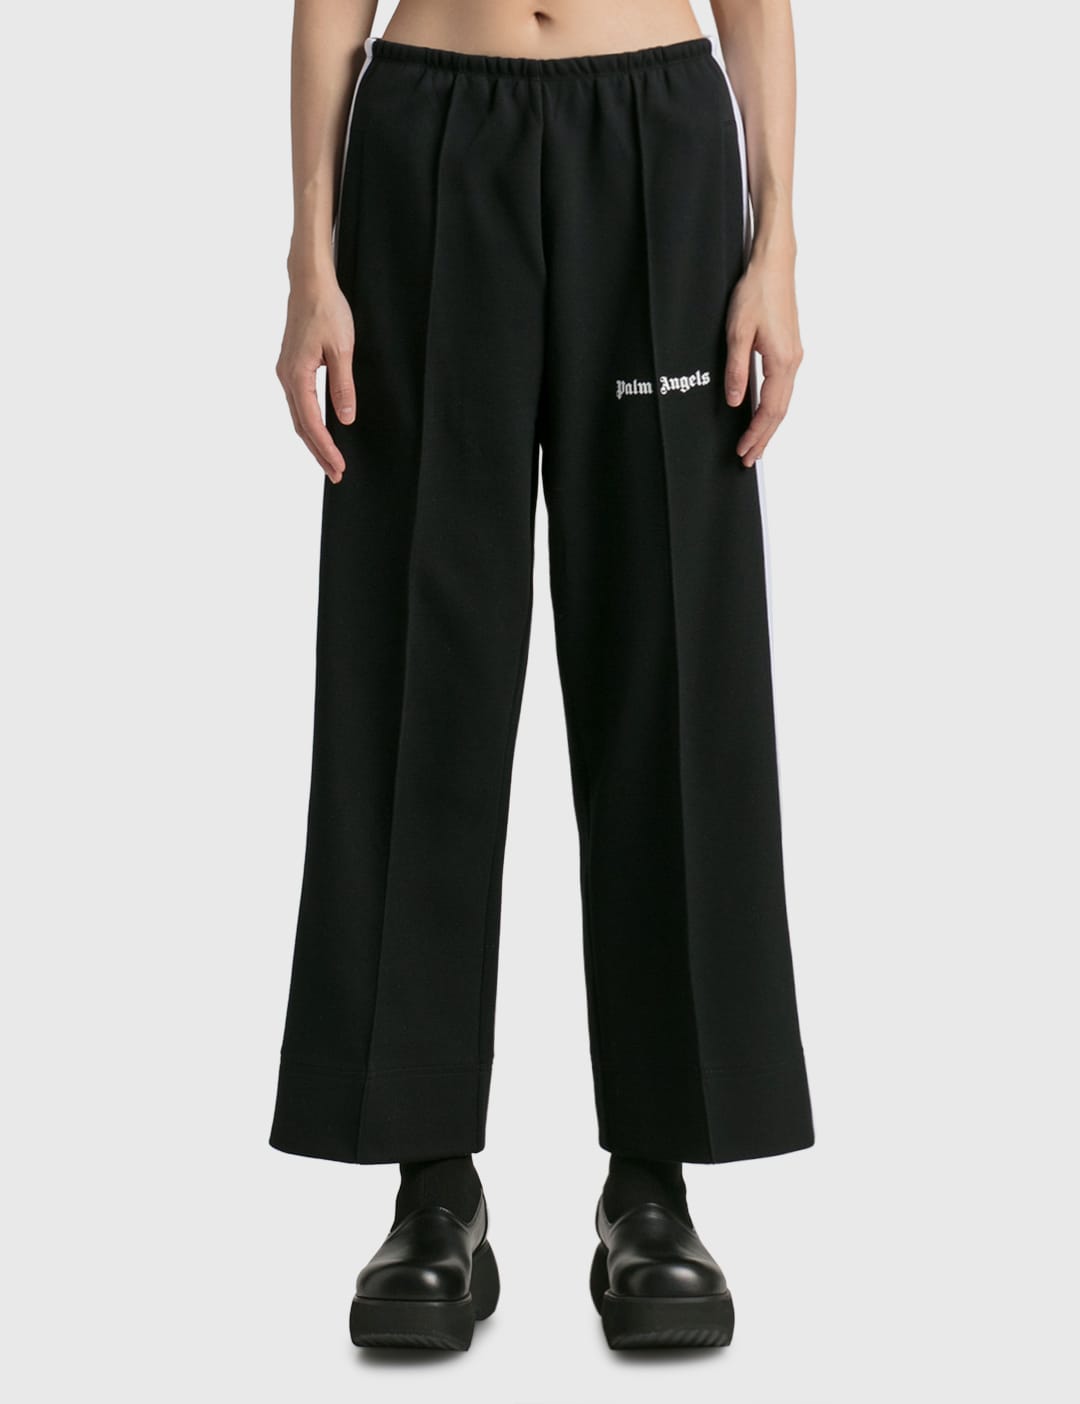 Palm Angels Cropped Track Pants